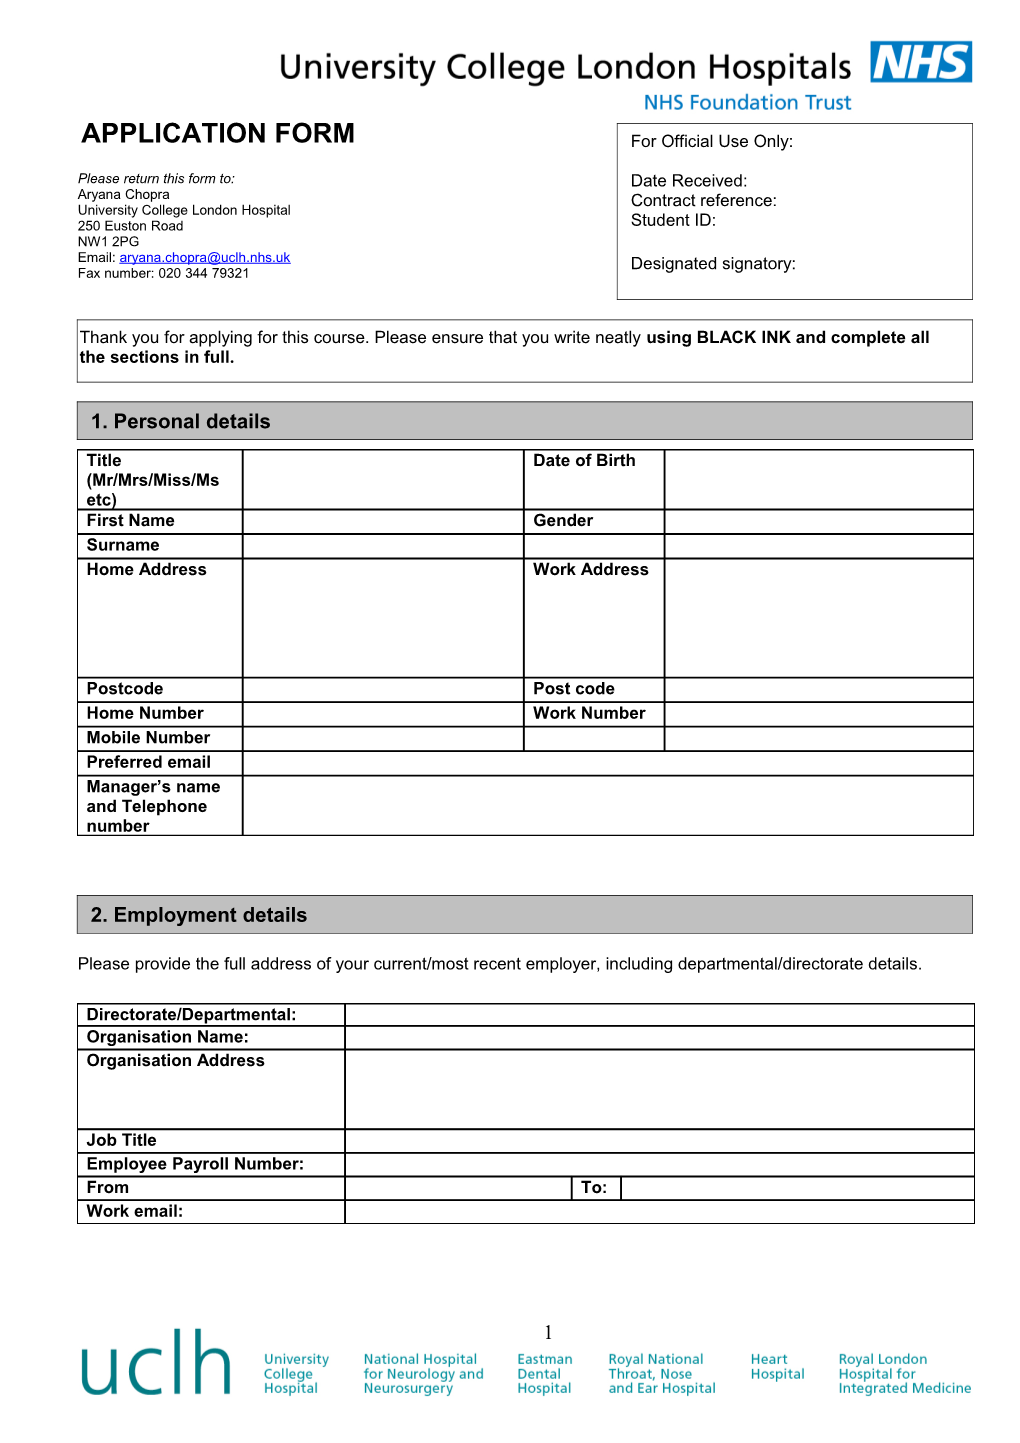 Cancer Clinical Trials Course Application Form